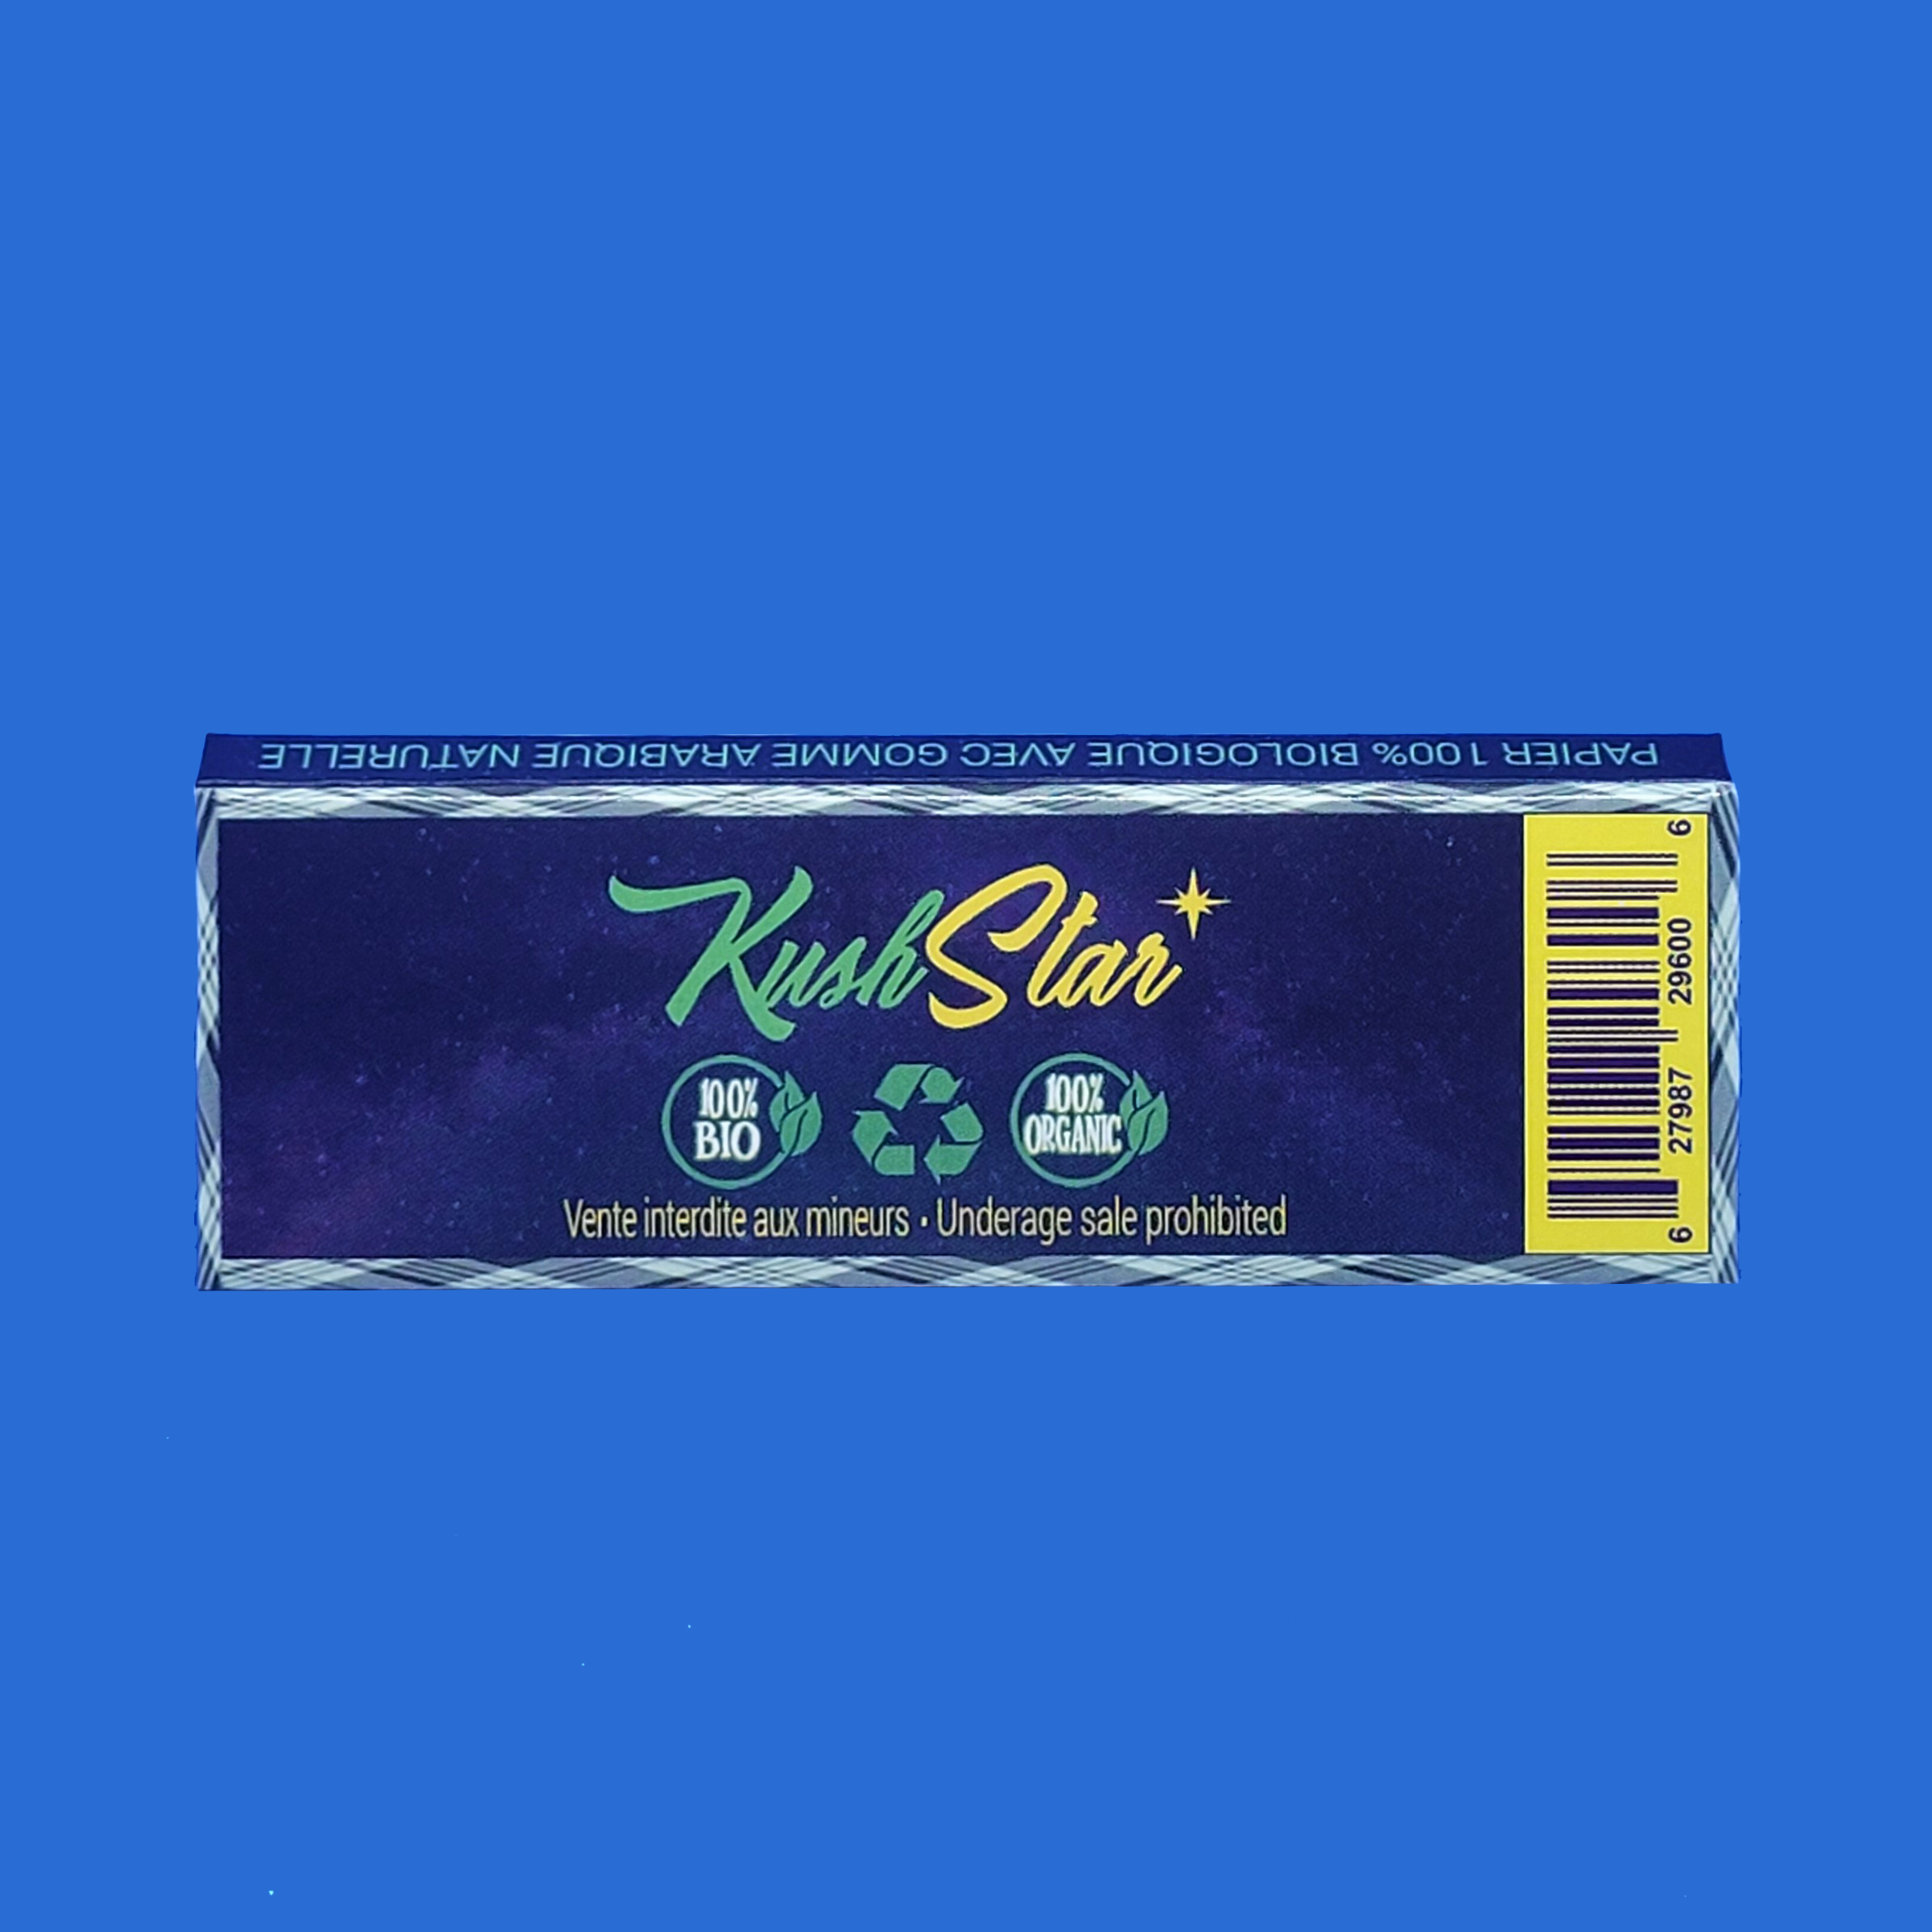 1 1/4 Size Rolling Paper & Natural Perforated Tips - Thin Organic Hemp  Paper - 24 Booklets Box - KushStar - Out of this World Rolling Paper